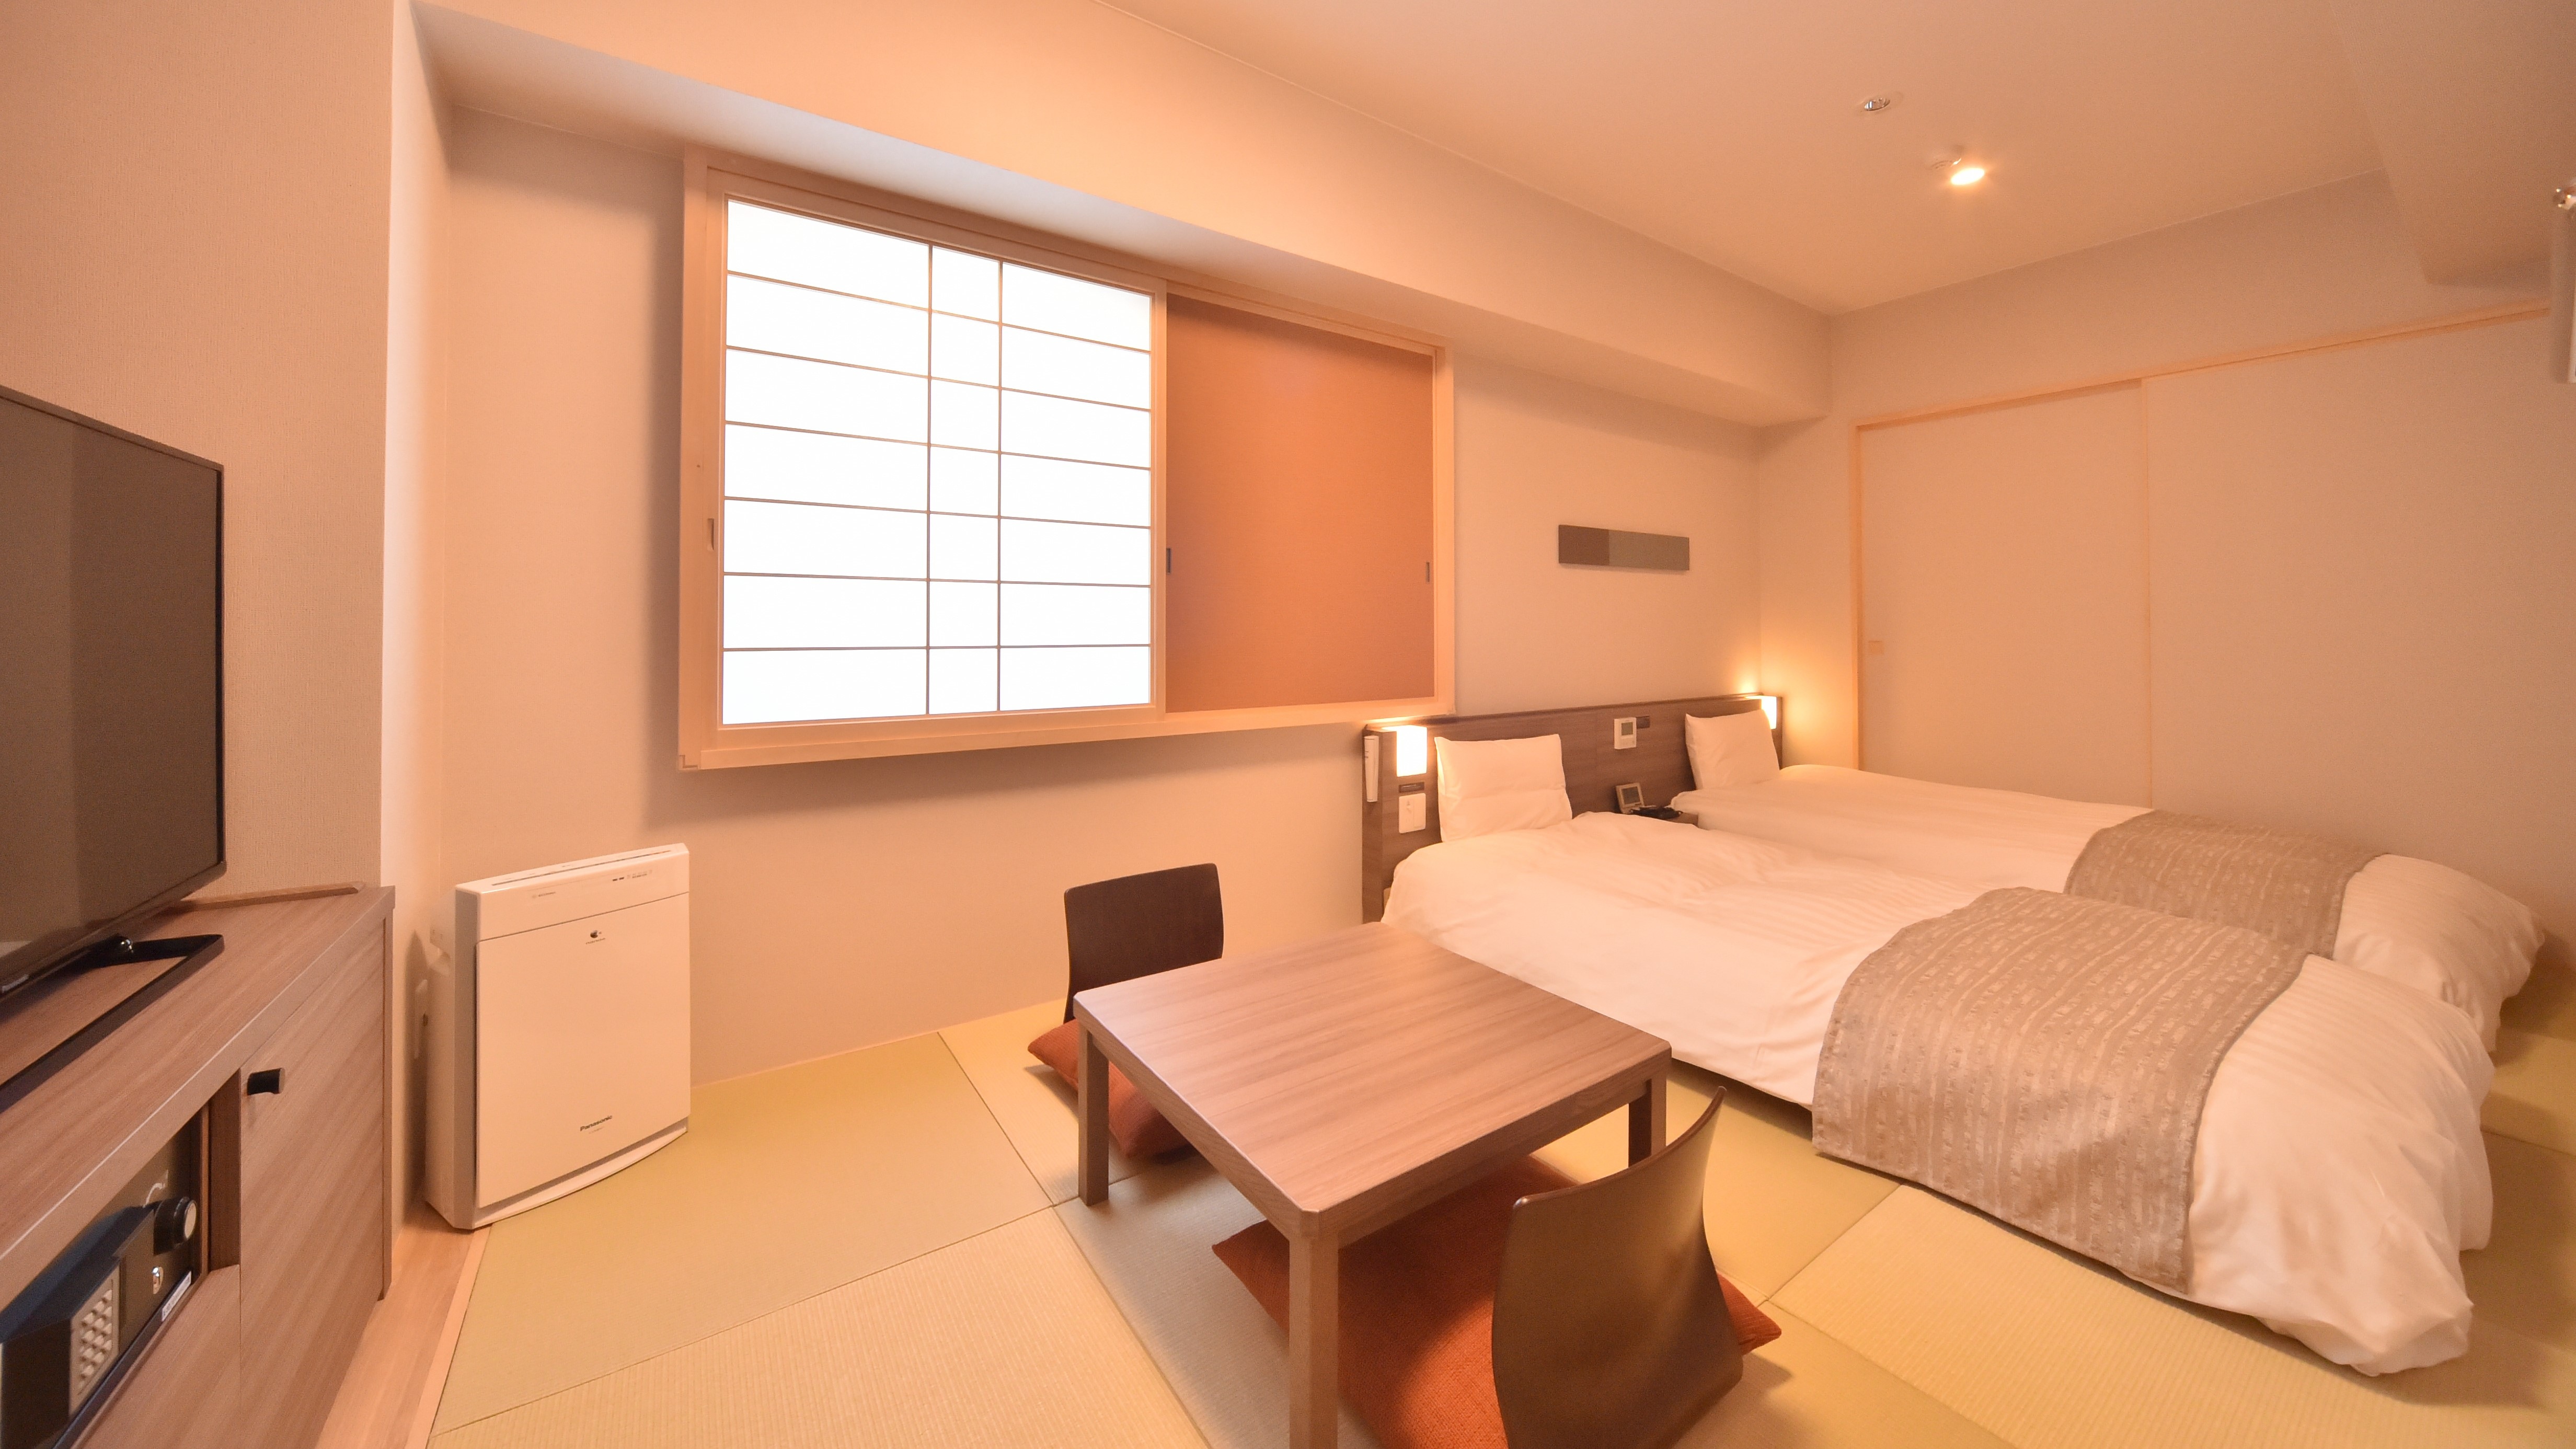 ◆ Non-smoking Japanese-style twin room ◆ [Bed size 100cm & times; 200cm] 22.1 sqm